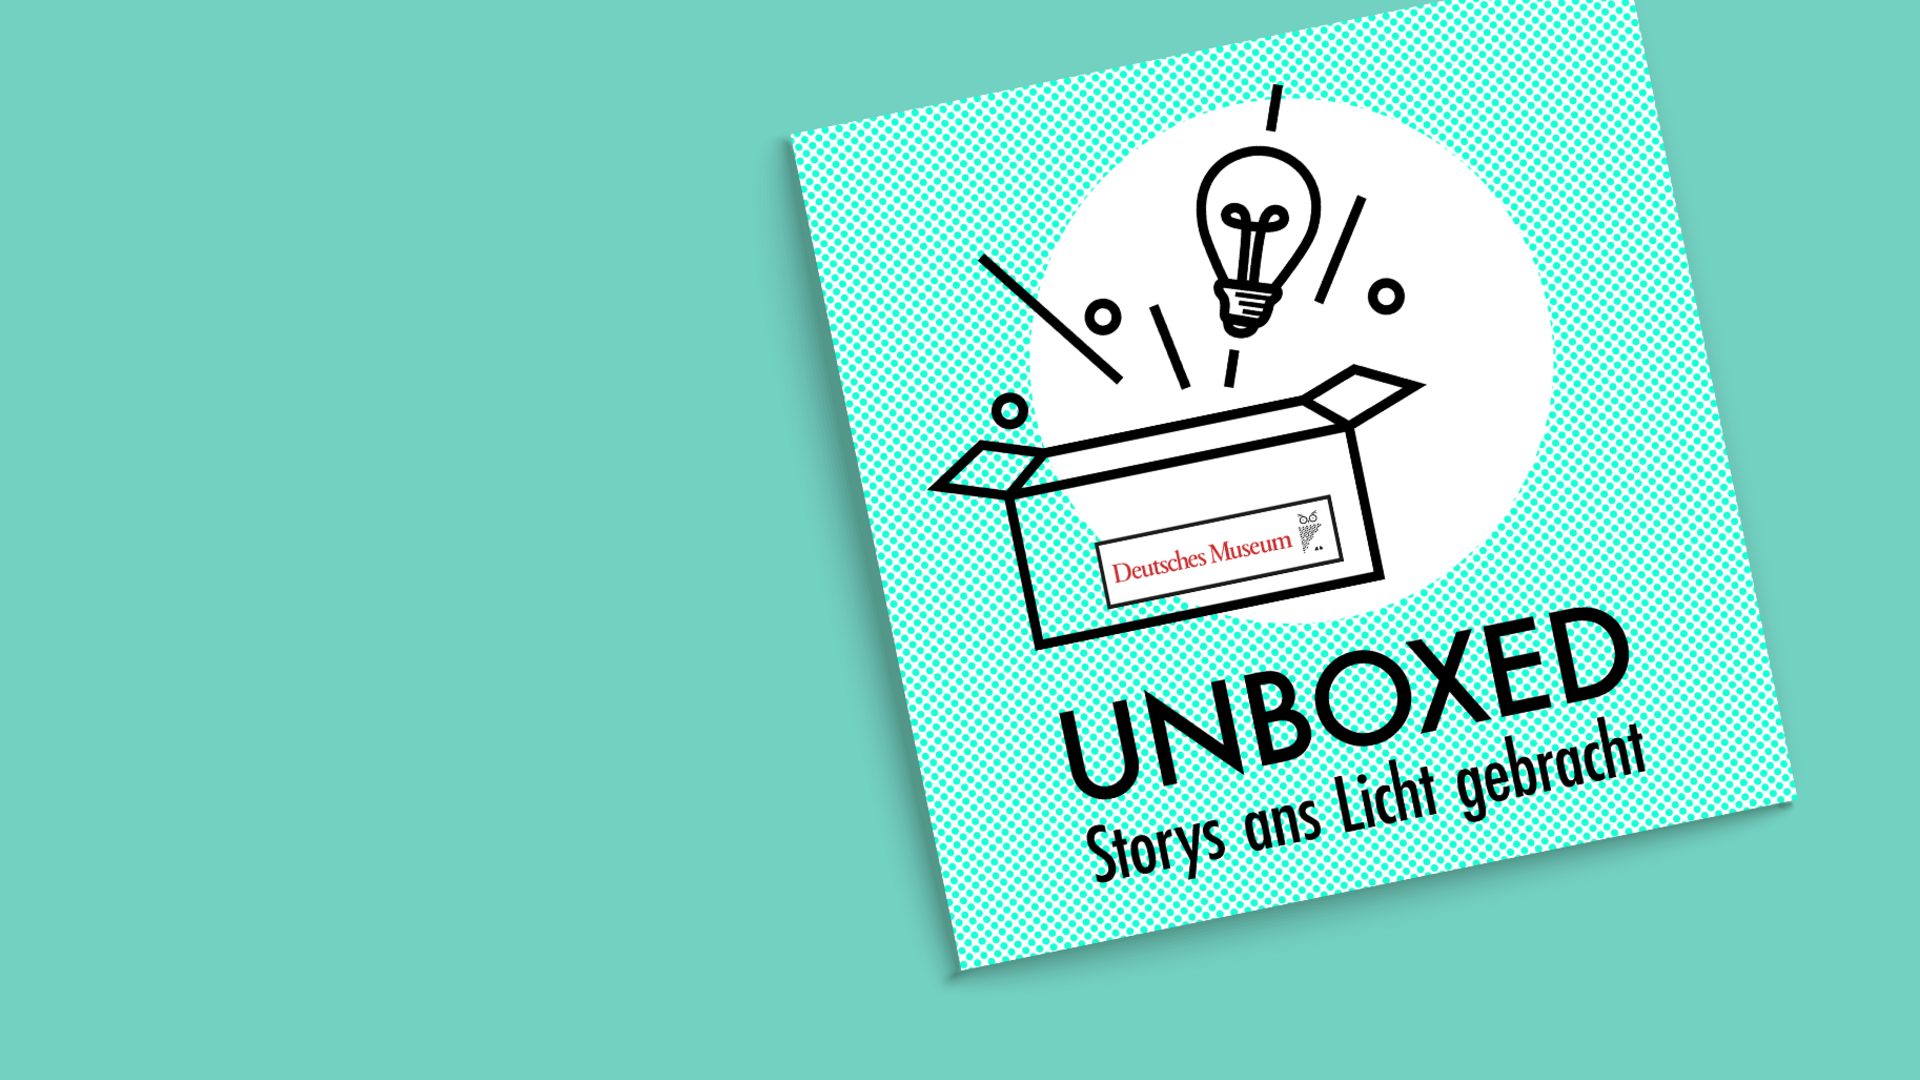 Podcast Cover "Unboxed - Storys ans Licht gebracht"